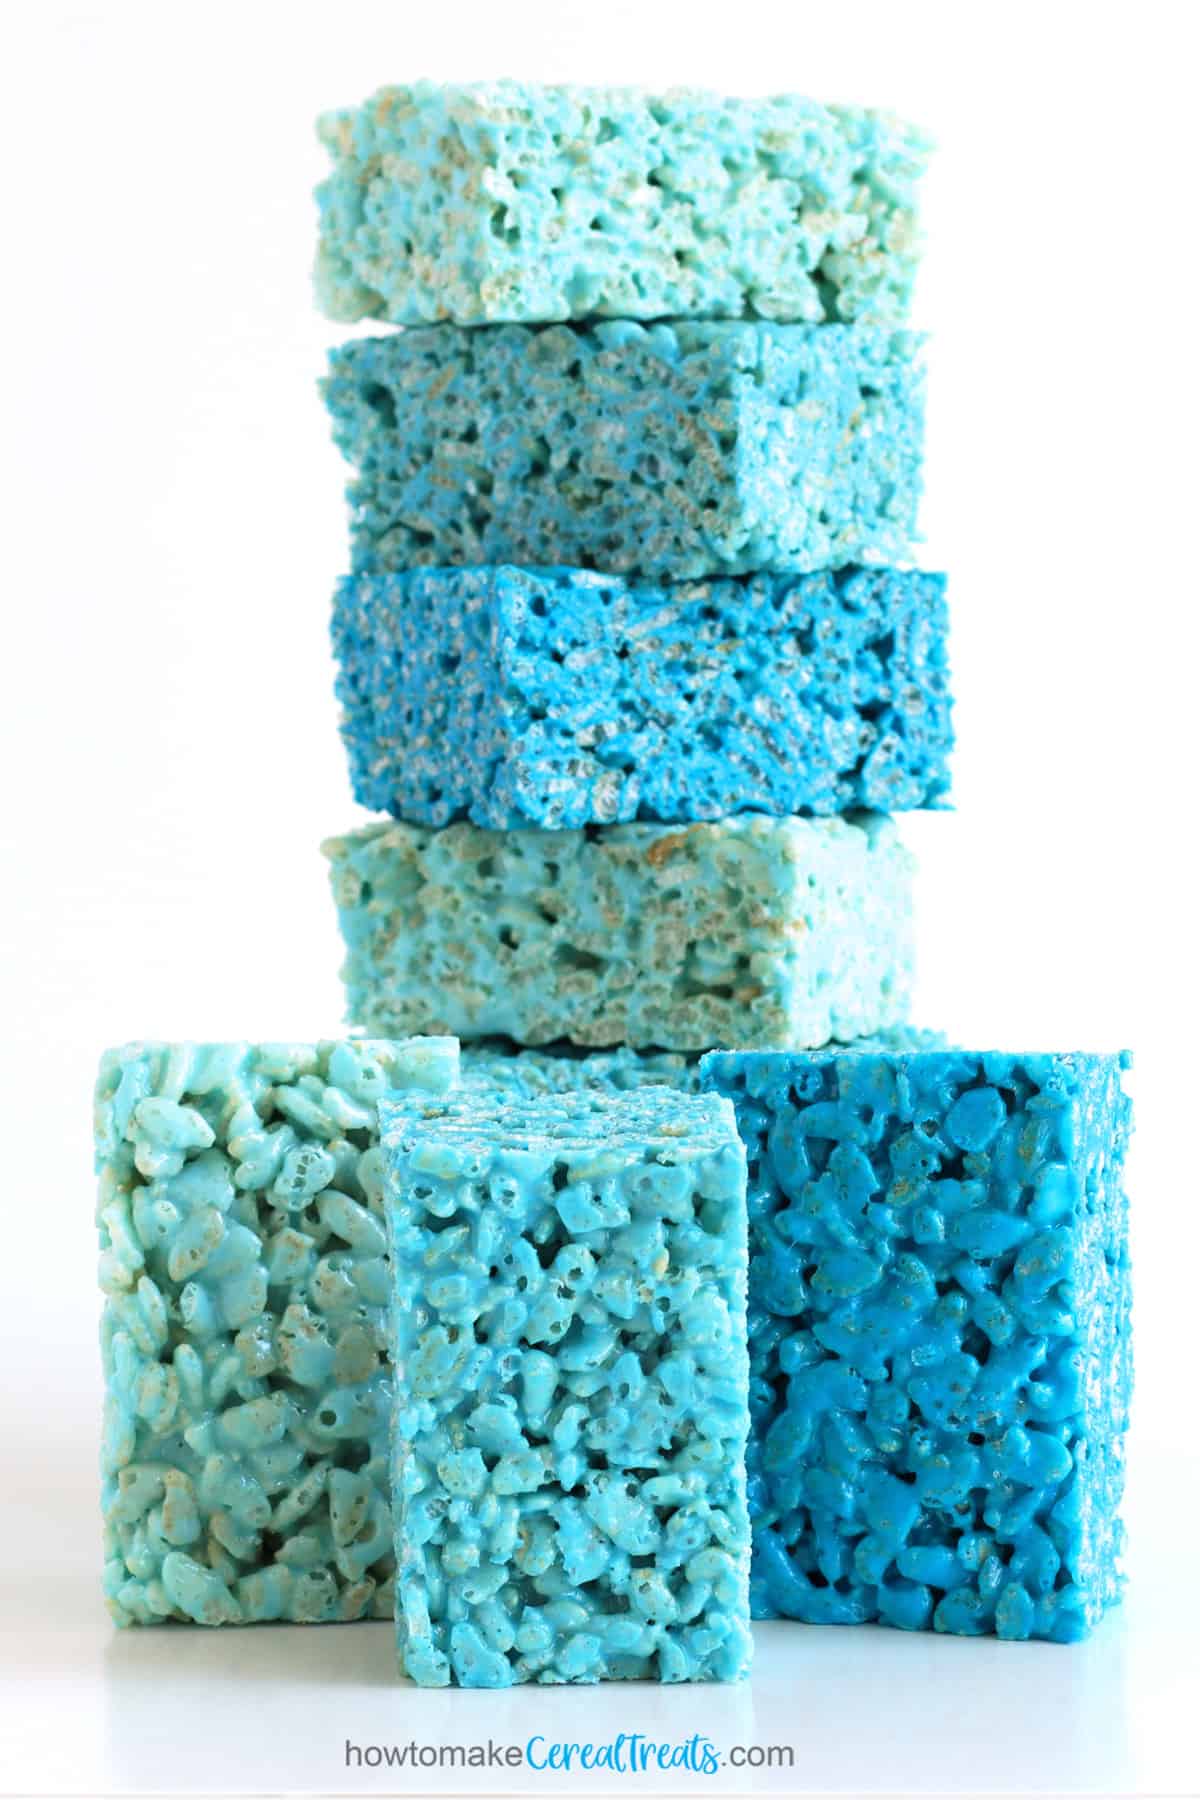 Blue rice krispie treats in 3 different shades of blue.